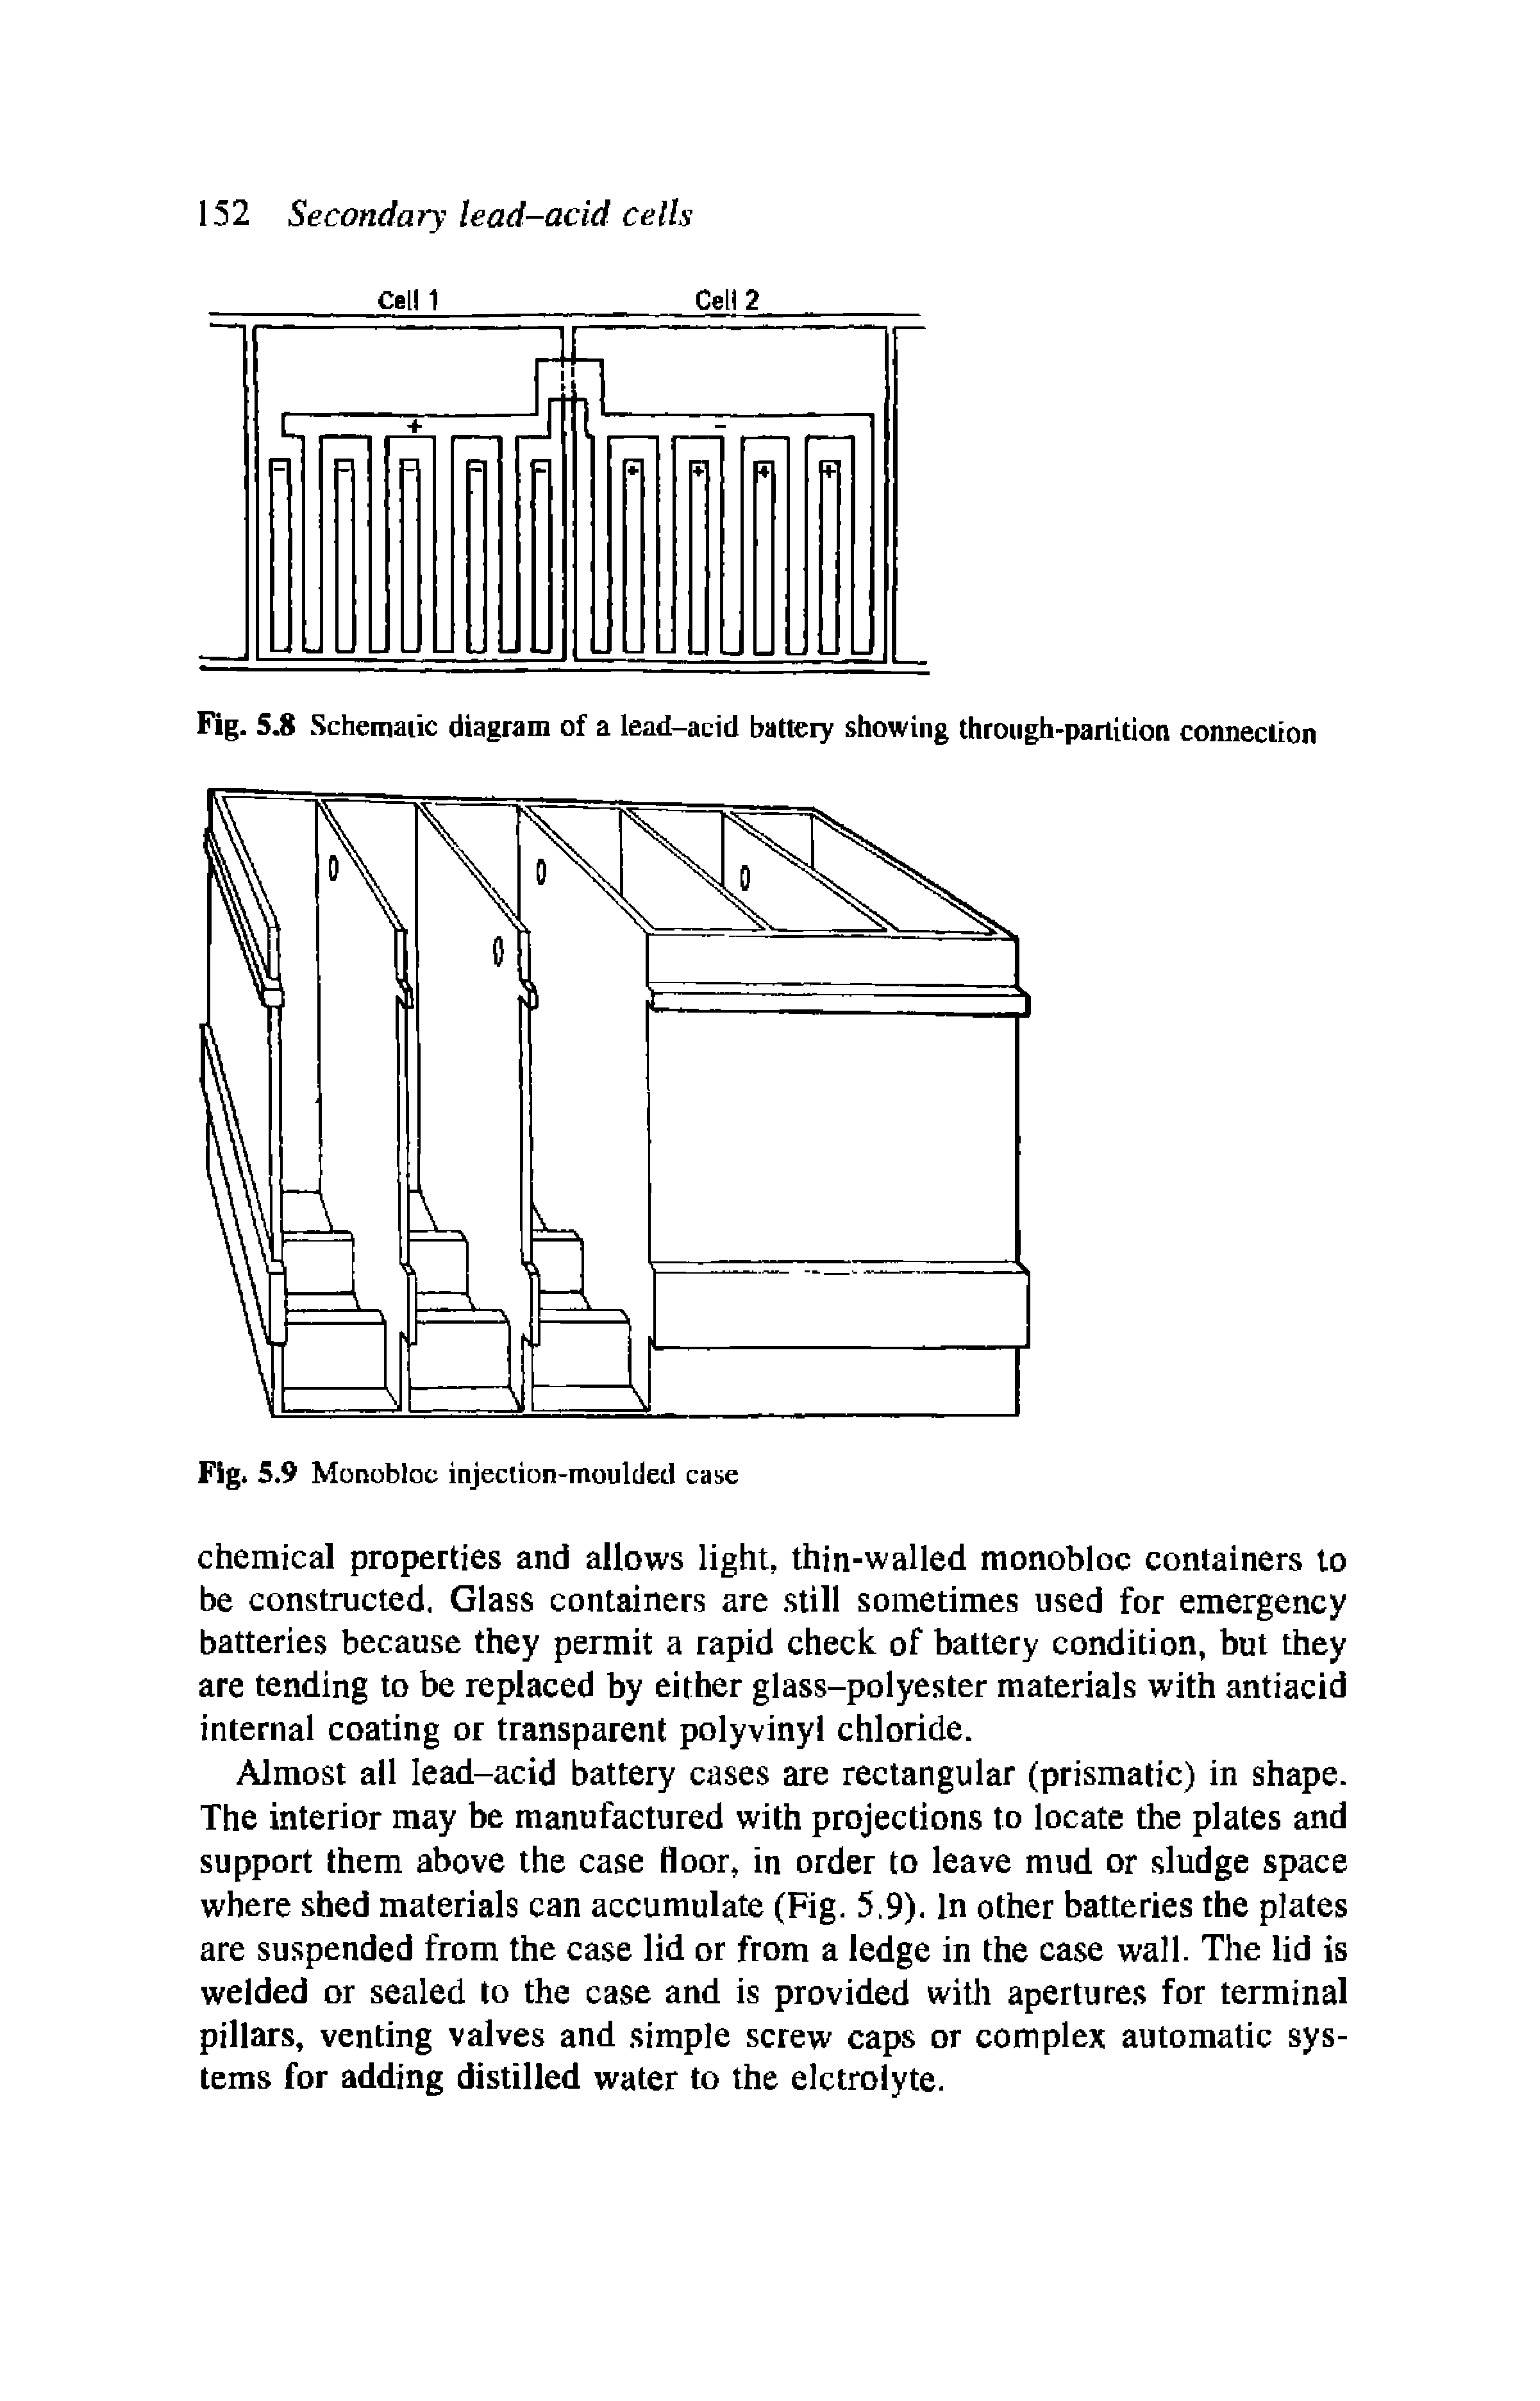 Fig. 5.8 Schematic diagram of a lead-acid battery showing through-partition connection...